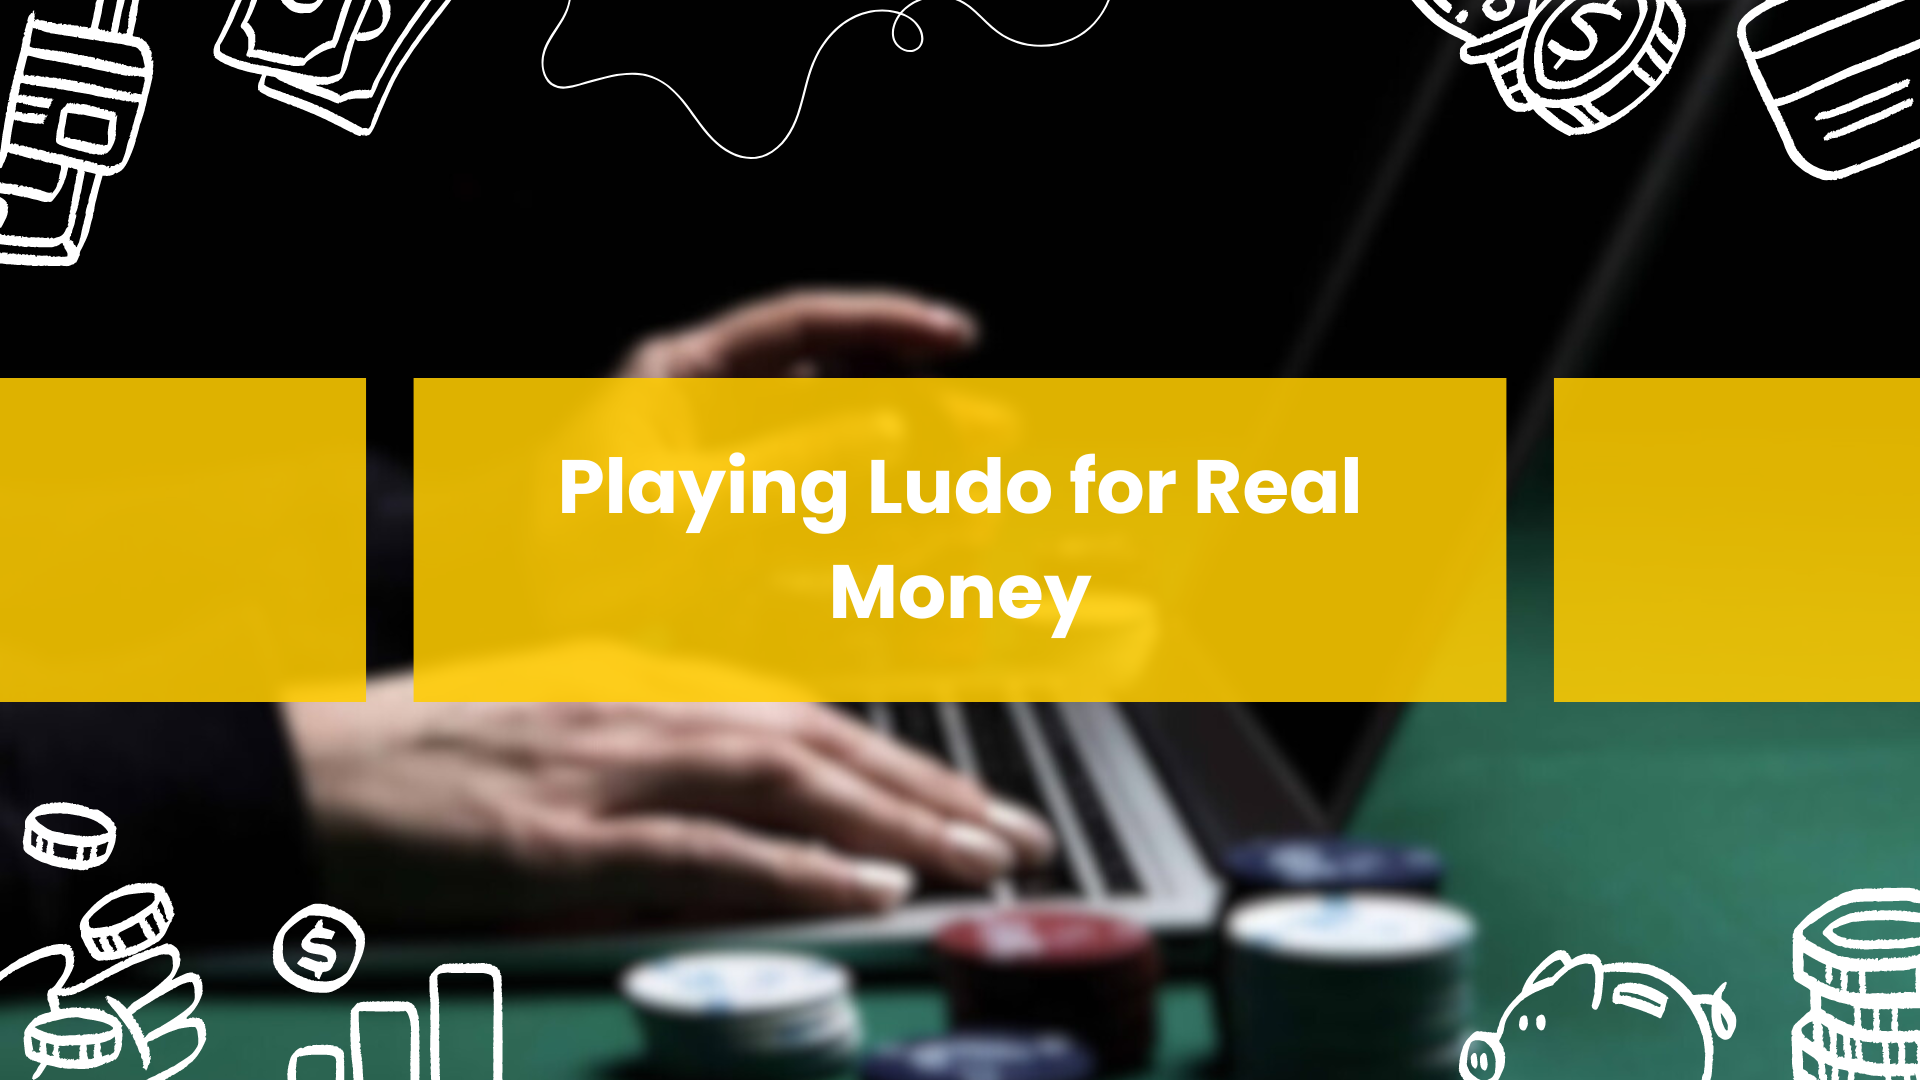 Playing Ludo for Real Money